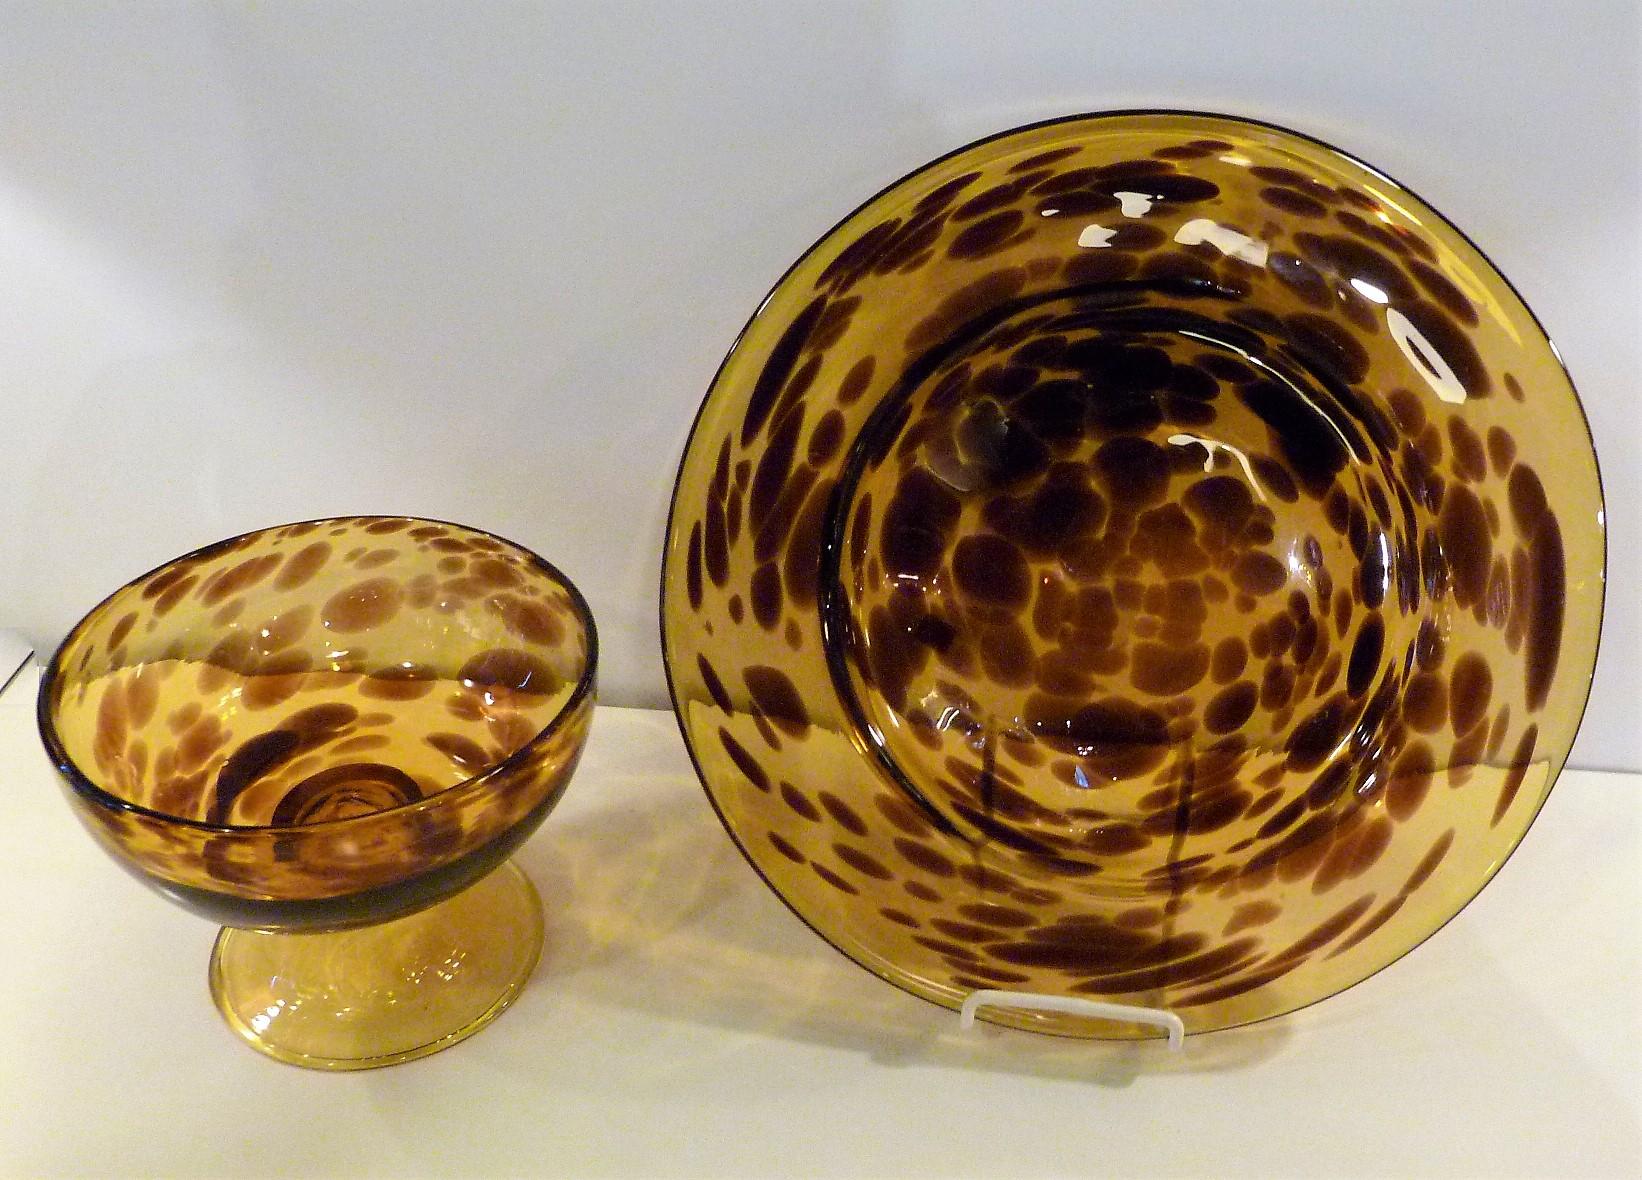 Italian Mid-Century Modern faux tortoiseshell footed blown glass bowl and large charger from the late 1960s-early 1970s.
The Tartaruga (tortoise) pattern in the footed bowl and charger have beautiful deep Topaz and Amber coloring resembling the